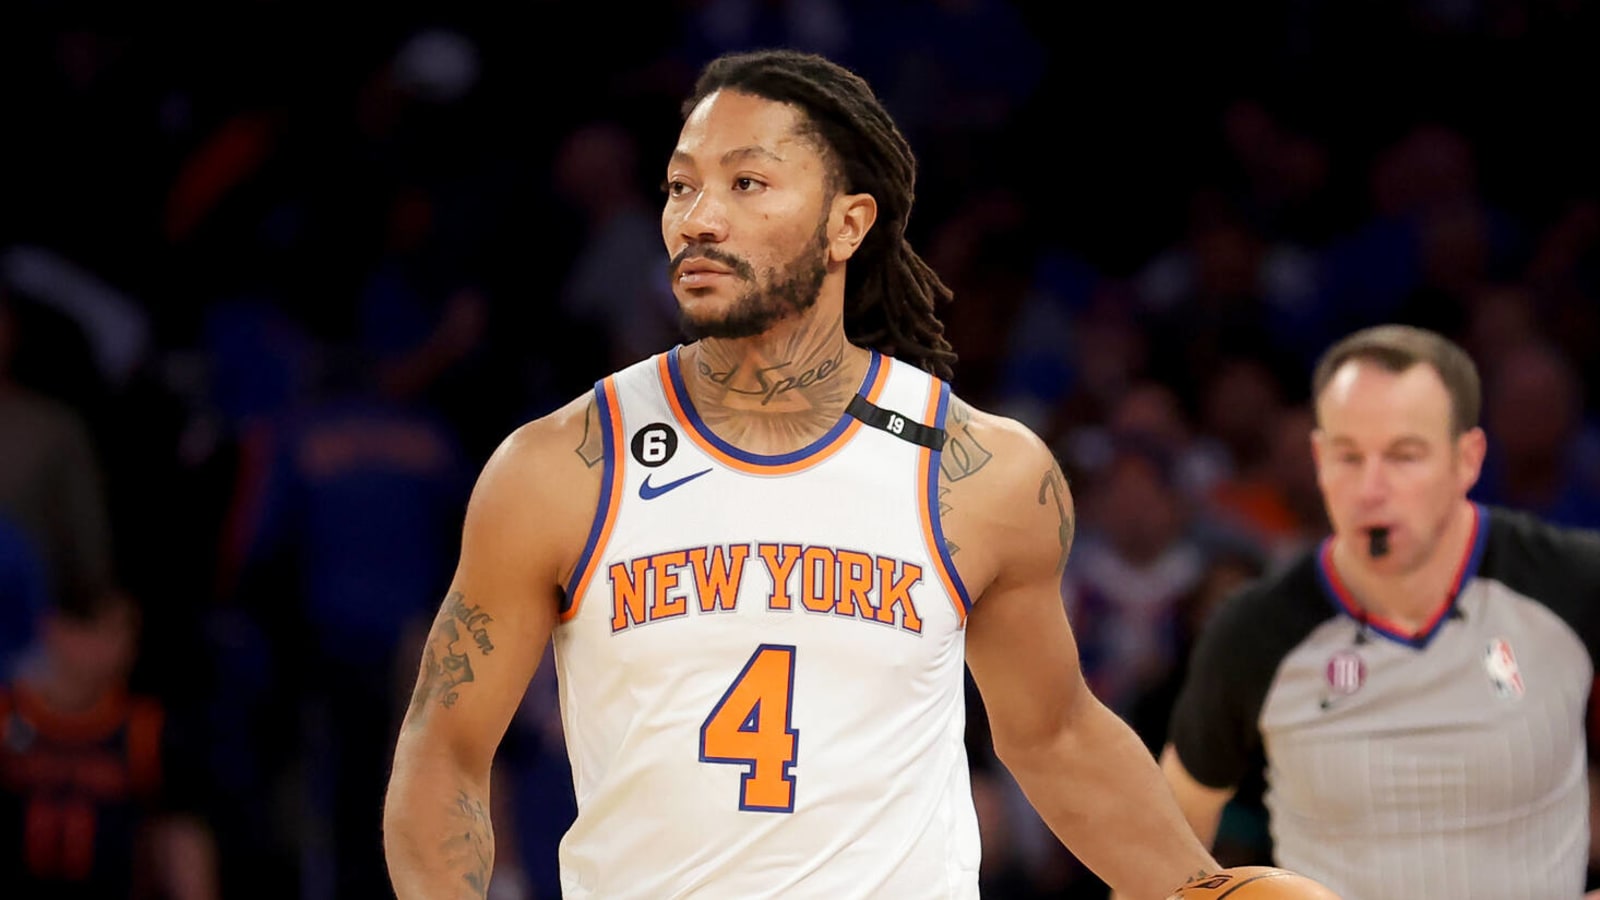 Derrick Rose seems happy to no longer be playing for Tom Thibodeau